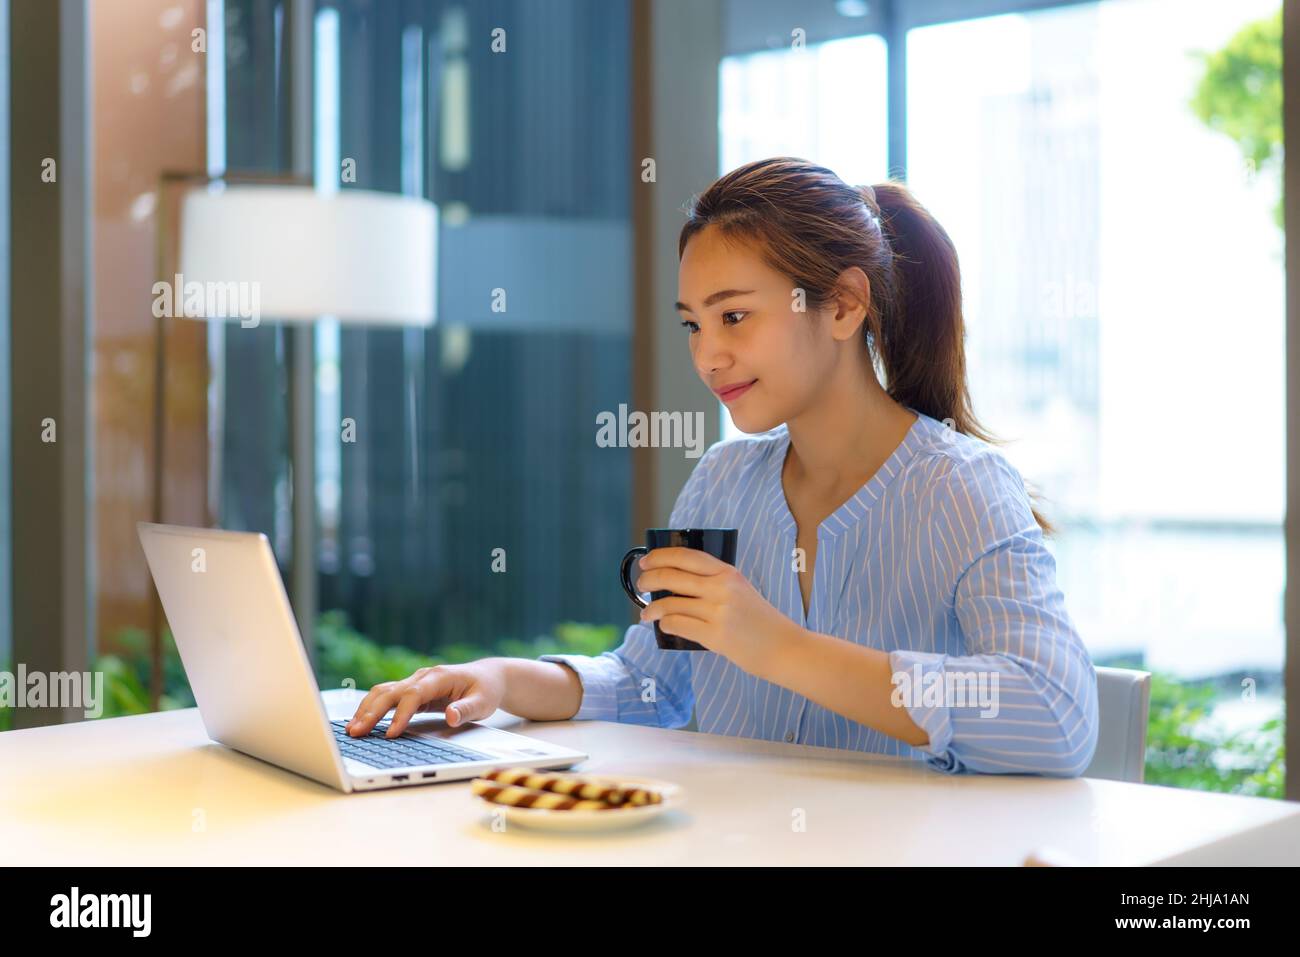 Asian woman drinking coffee in mug and smiling happily while taking a break from work at her computer during work at home in the living room. Stock Photo